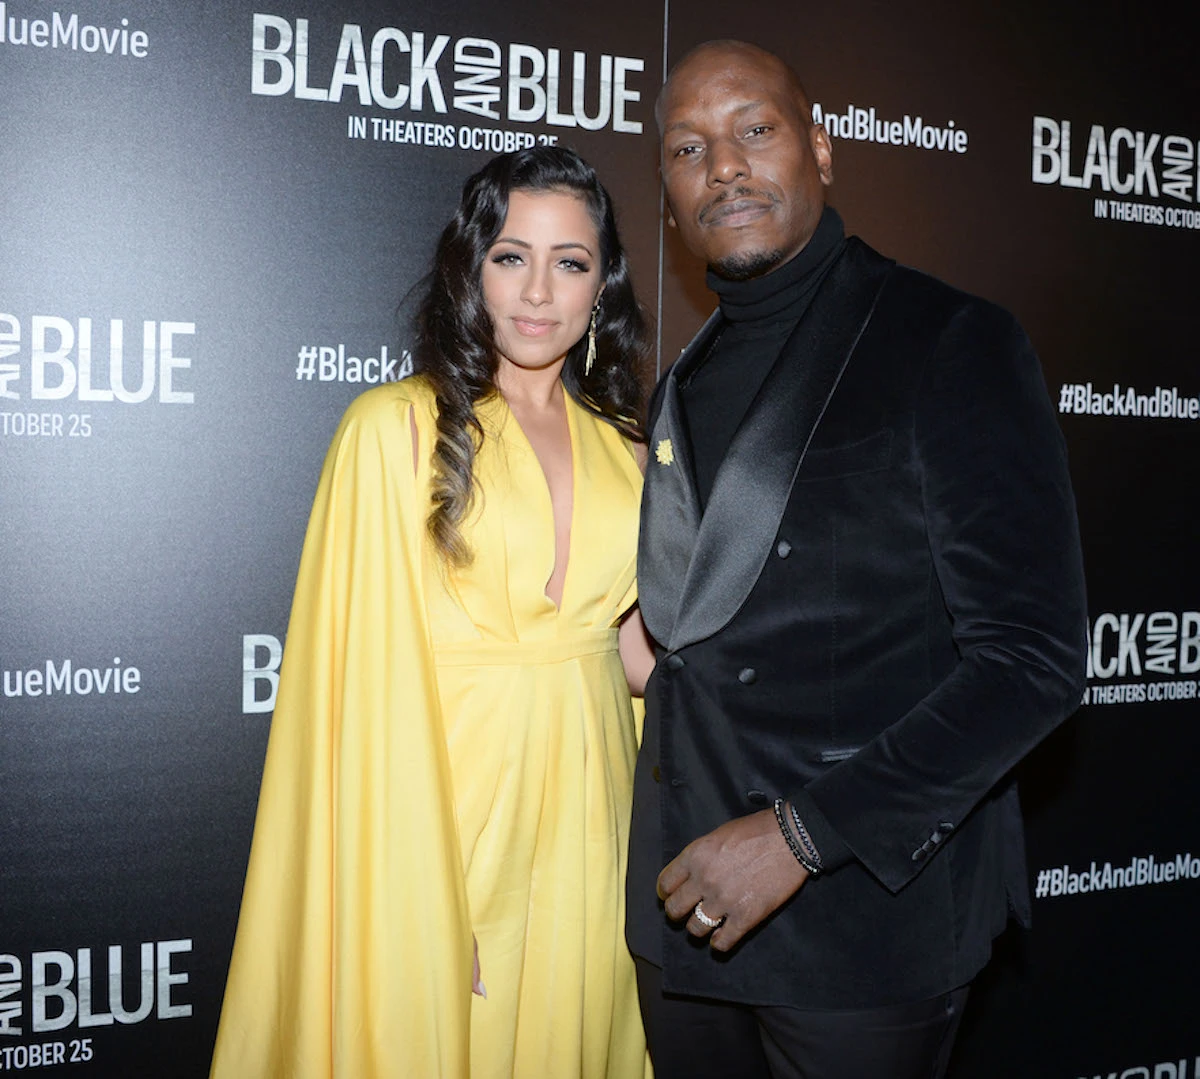 Tyrese Gibson ordered to pay $636K in child support and legal fees to his ex-wife